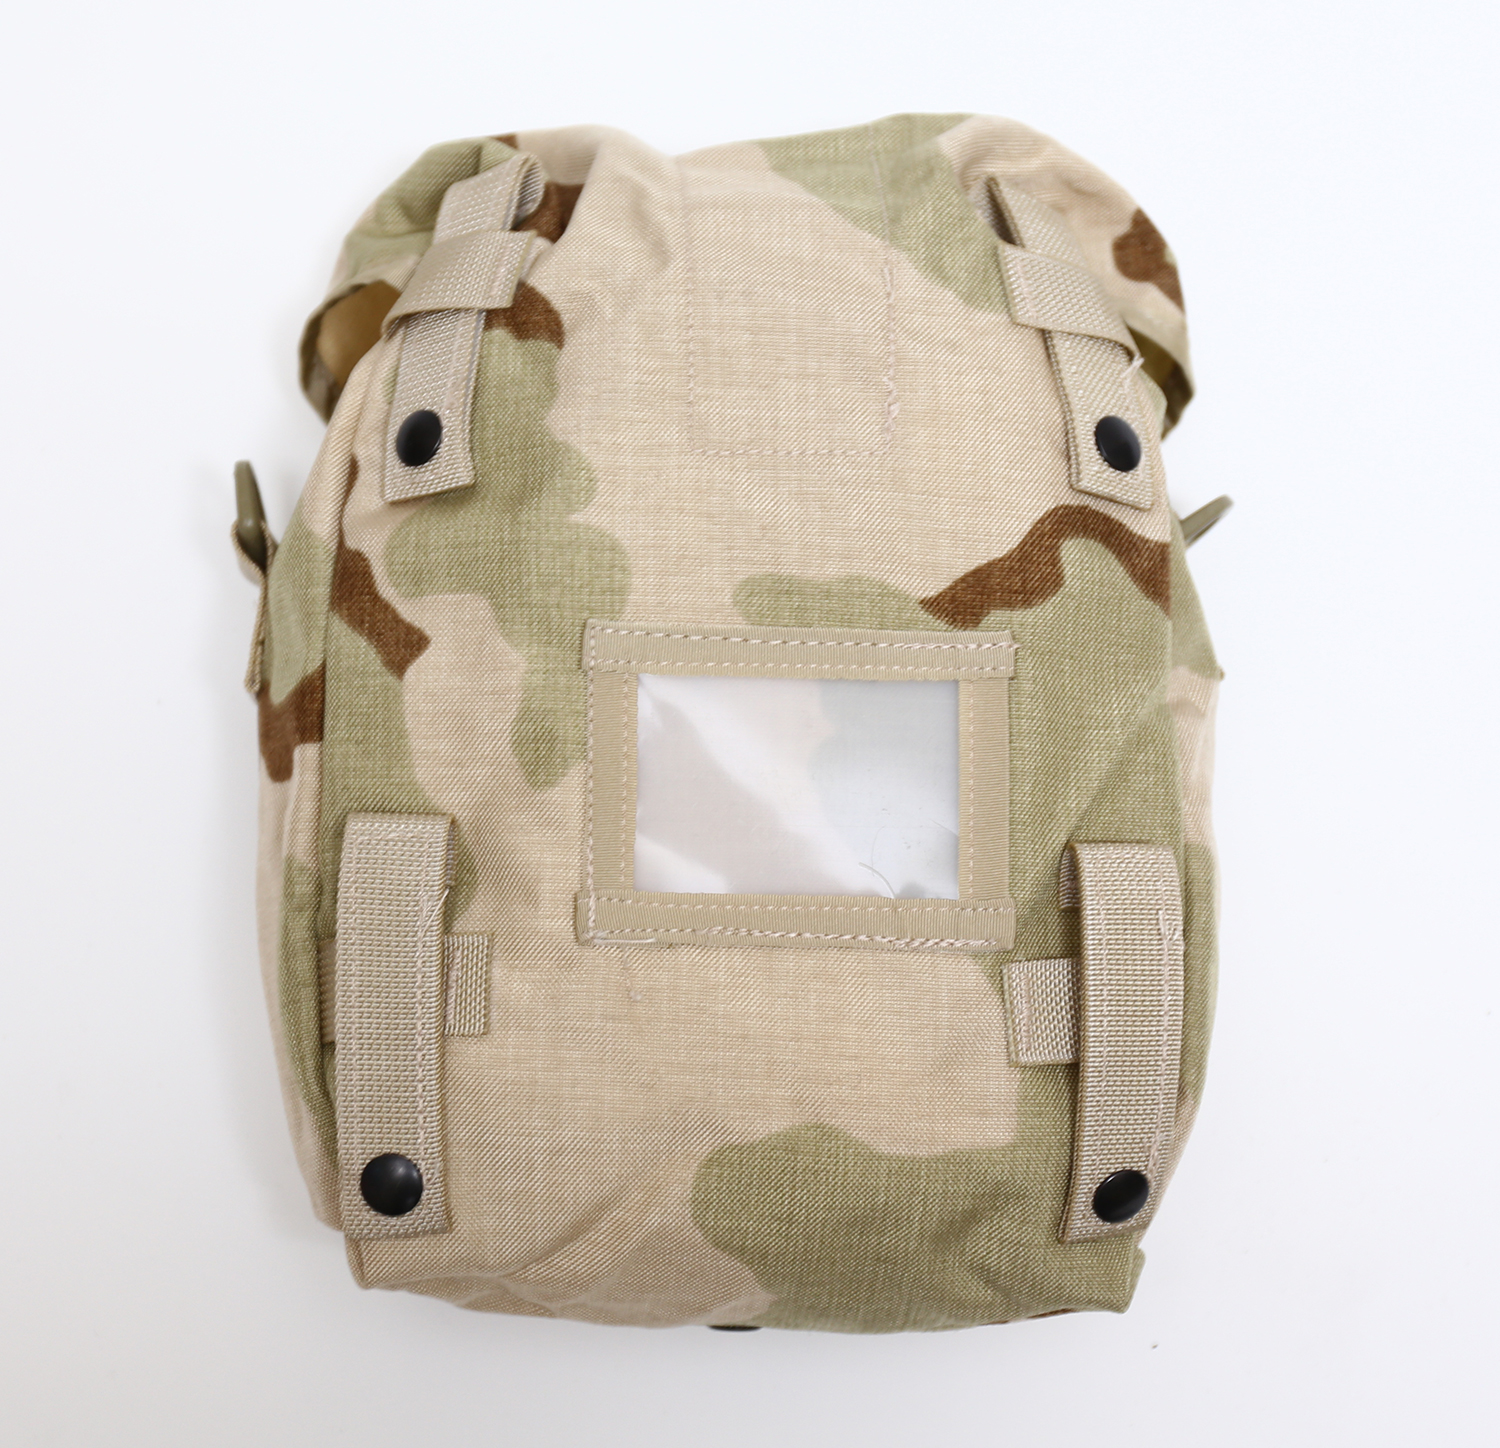 MOLLE 2  MODULAR LIGHTWEIGHT ＬOAD CARRYING EQUIPMENT SUSTAINMENT POUCH